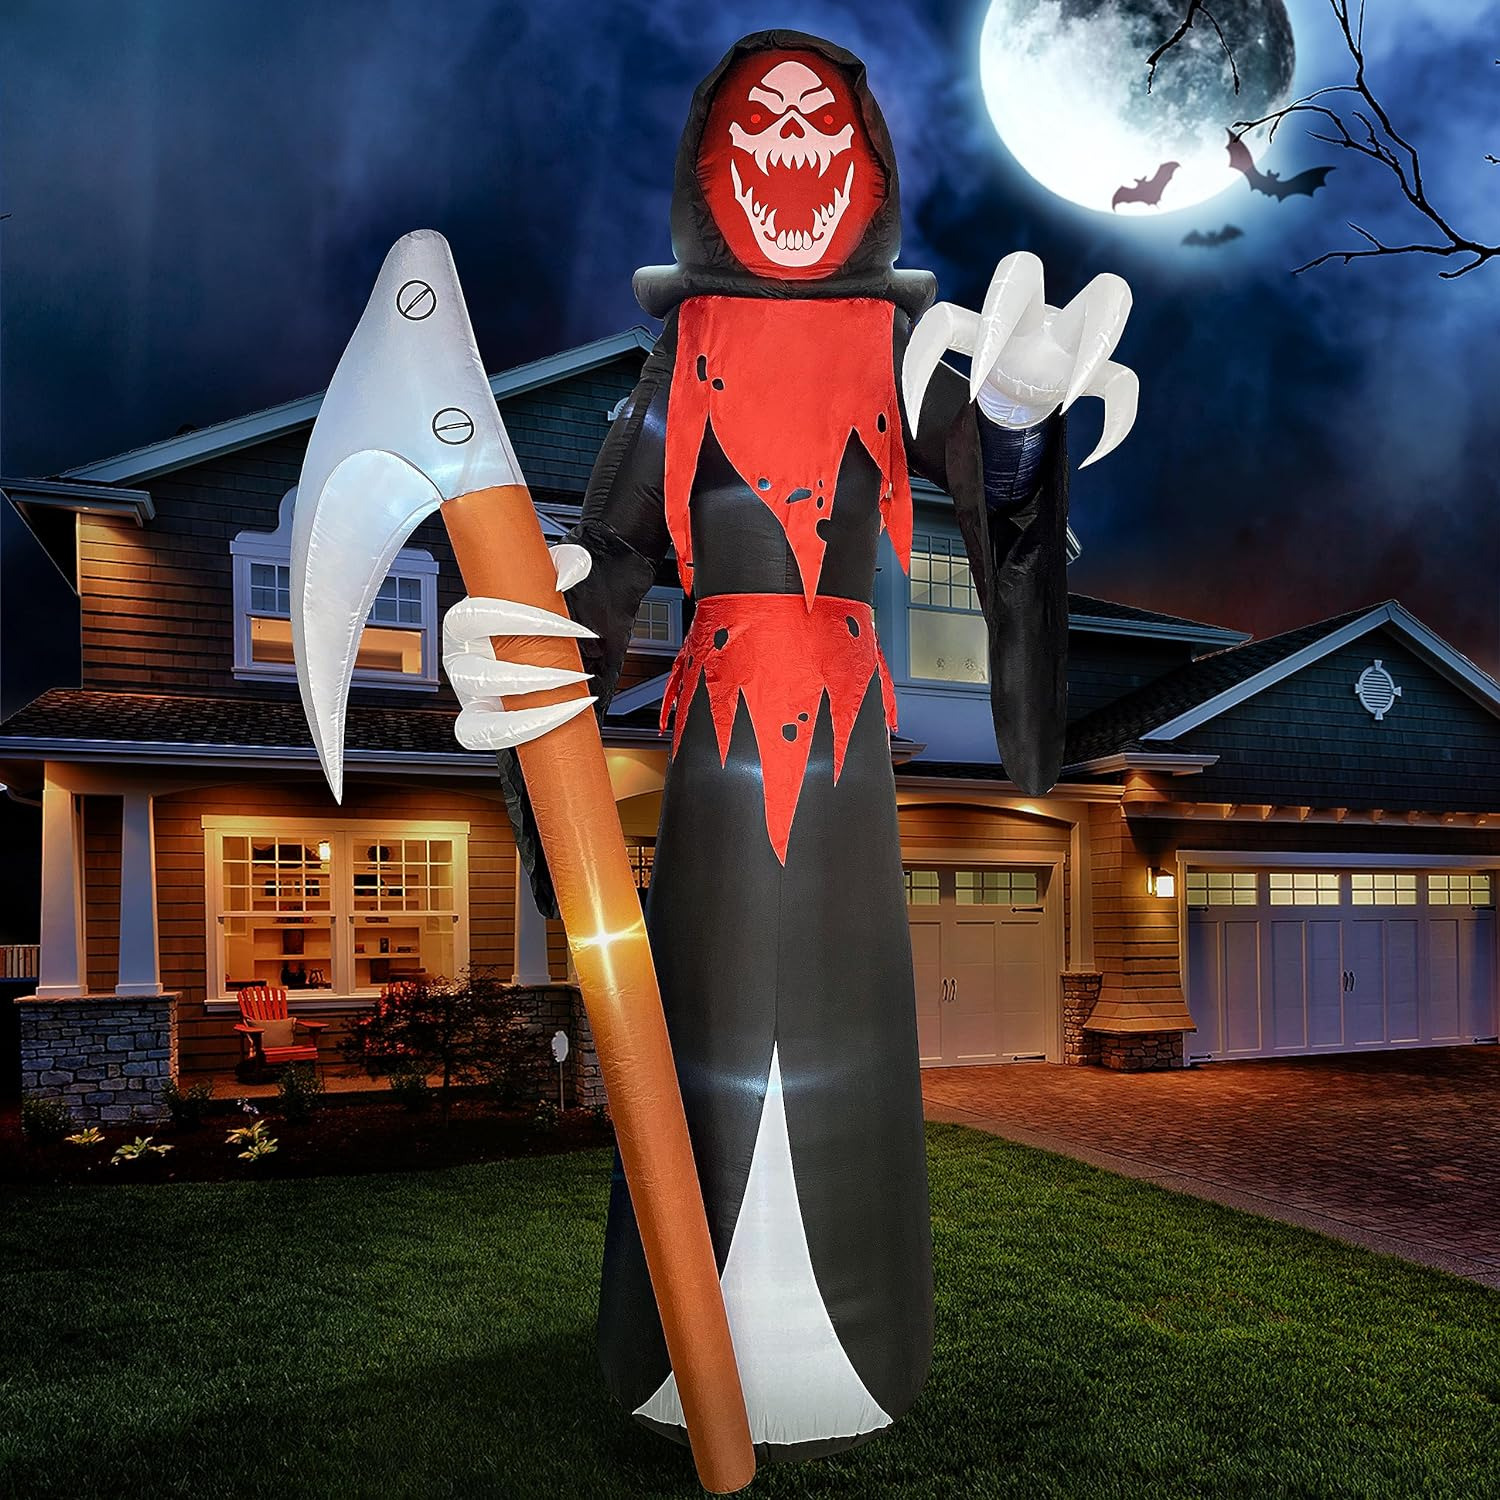 12 Ft Tall Giant Scary Halloween Inflatable Grim Reaper with Scythe, Blow up Rea